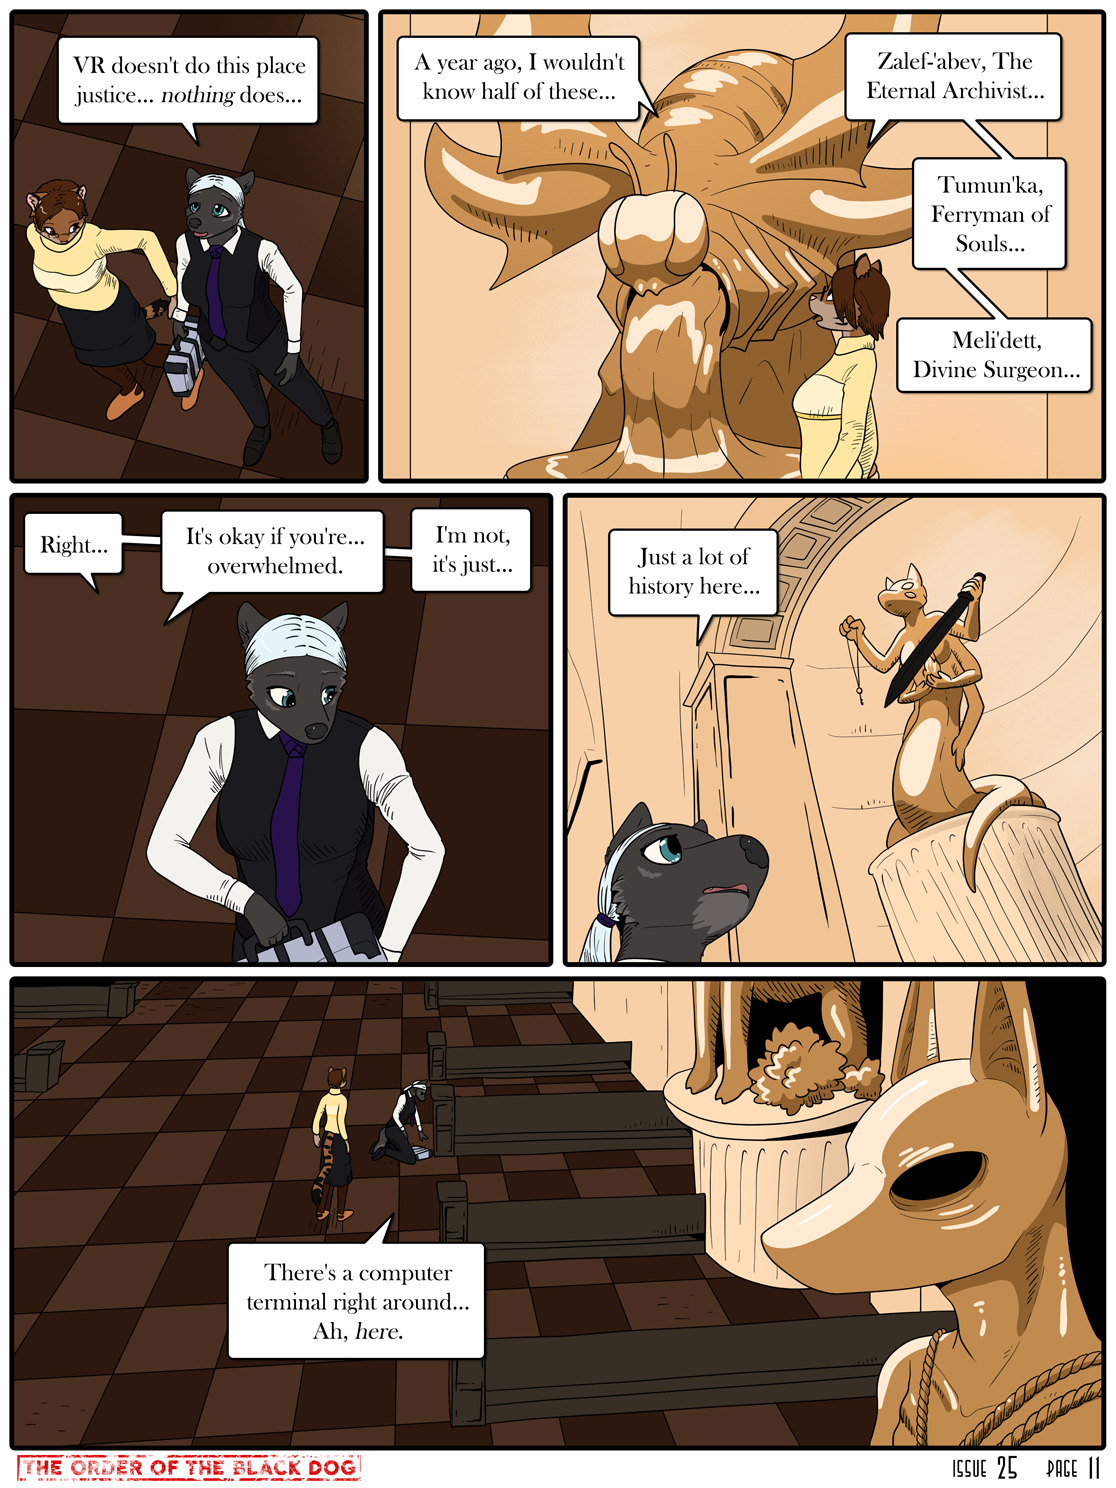 Issue 25, Page 11